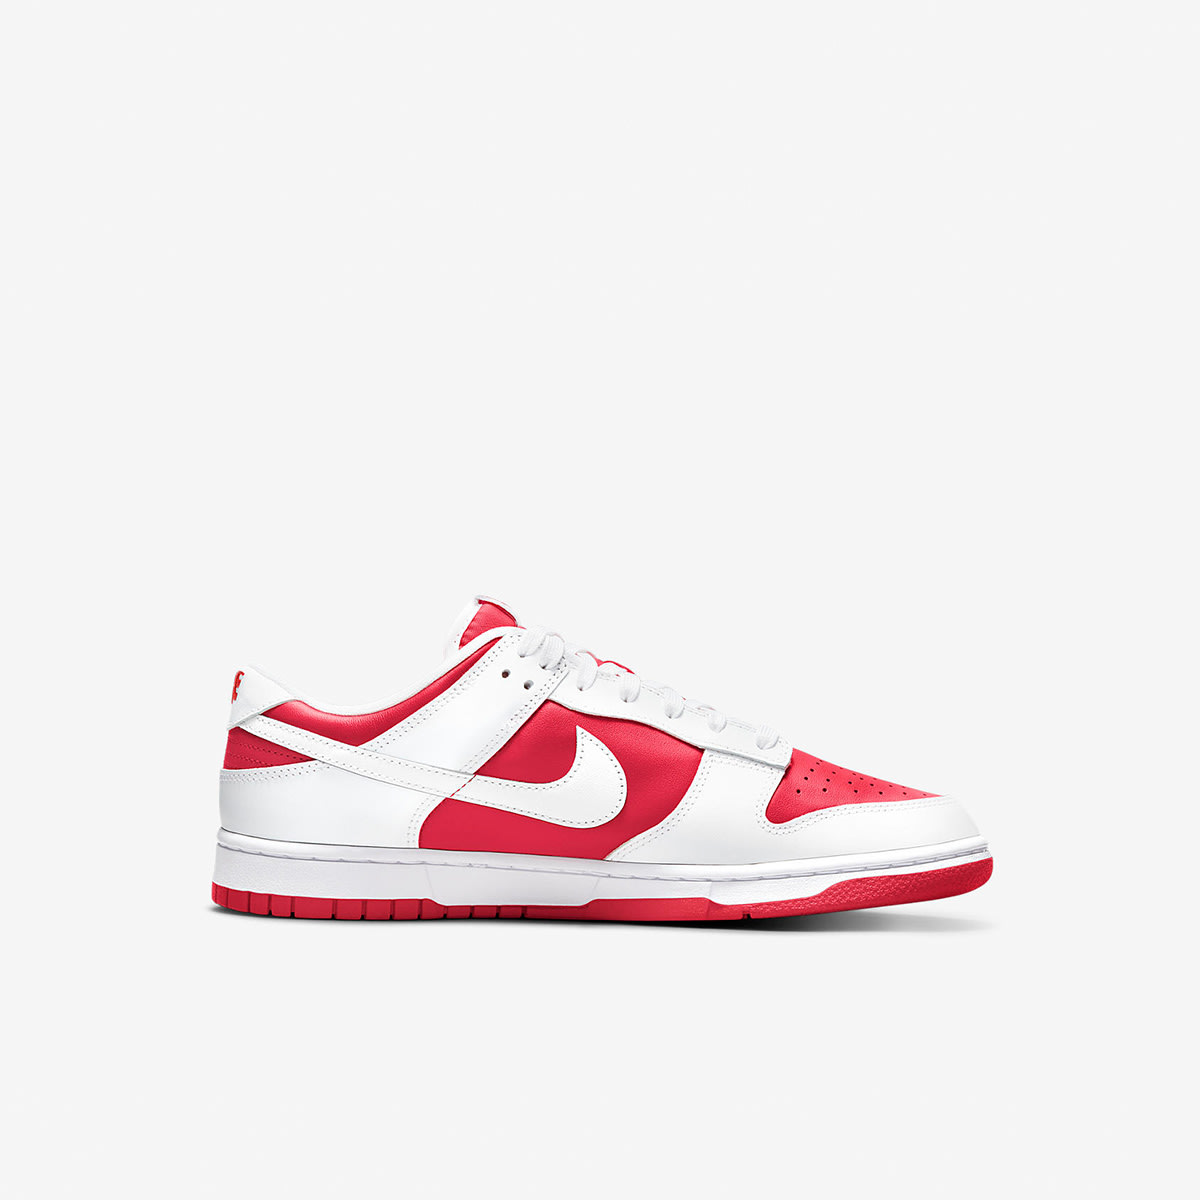 Nike Dunk Low Retro (Red, White & Orange) | END. Launches